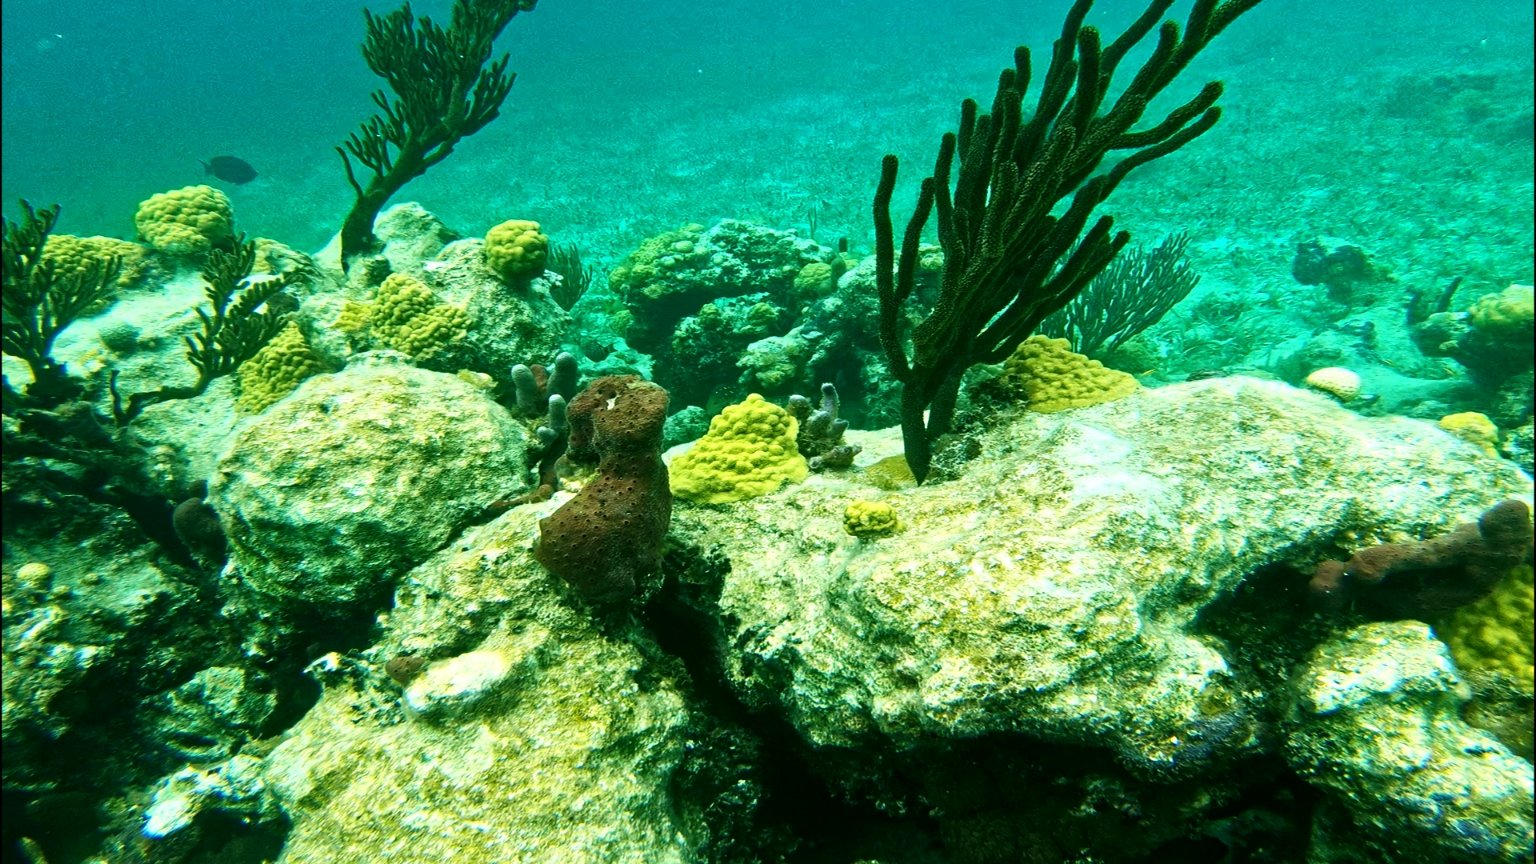 A picture of coral reef taken while snorkeling in Providenciales